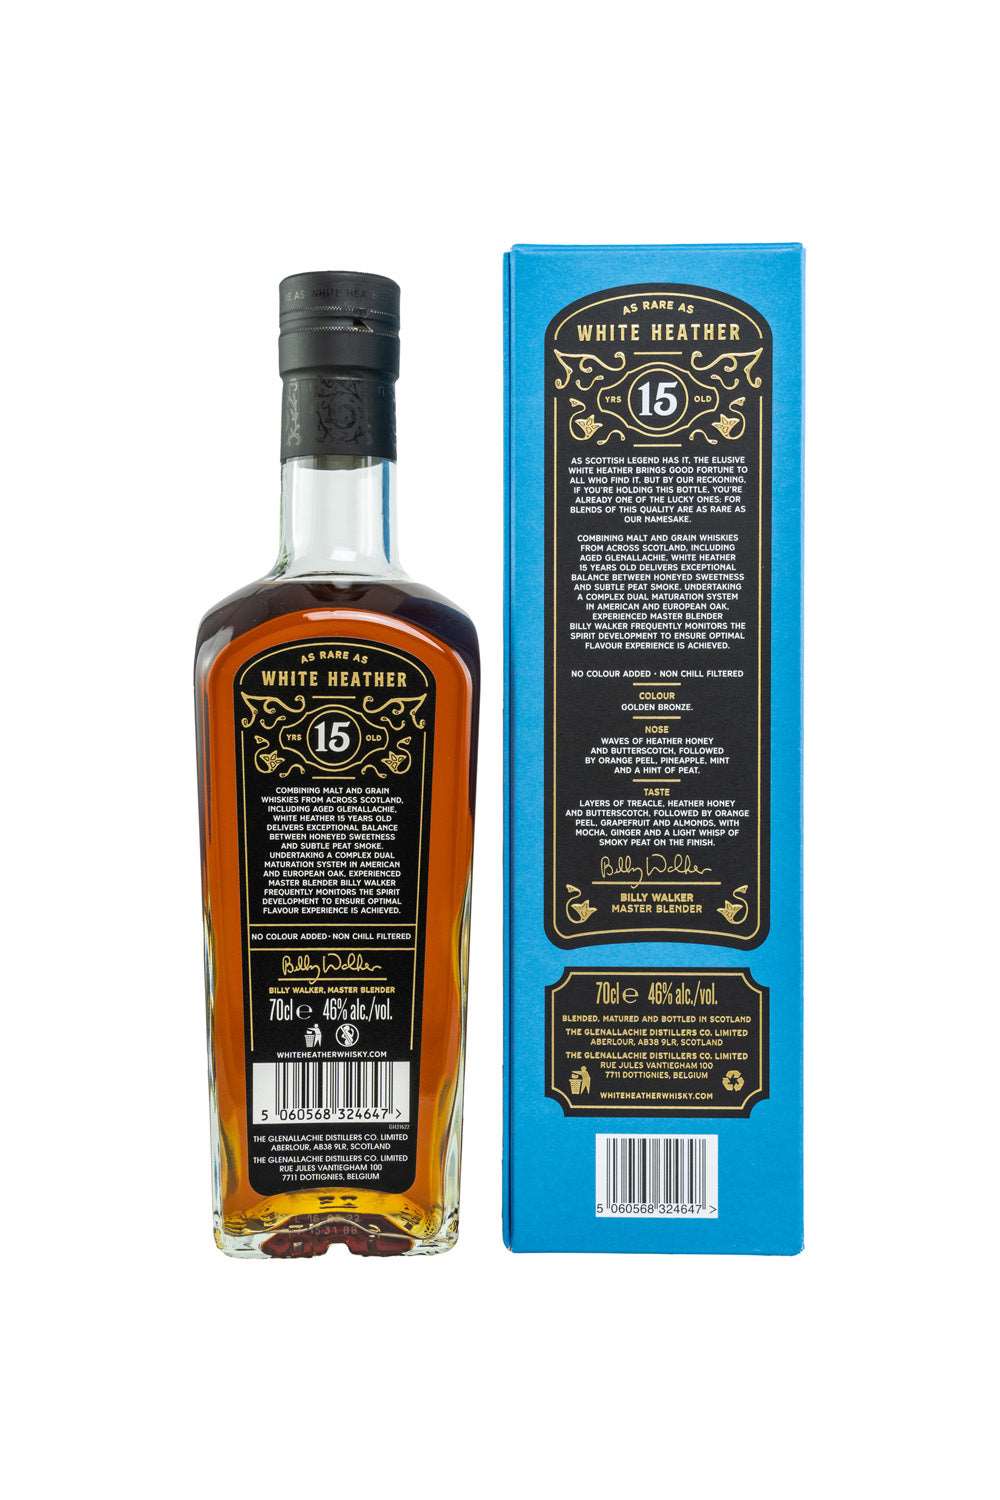 White Heather 15 y.o. Blended Scotch Whisky by Billy Walker 46% vol. 700ml - Maltimore